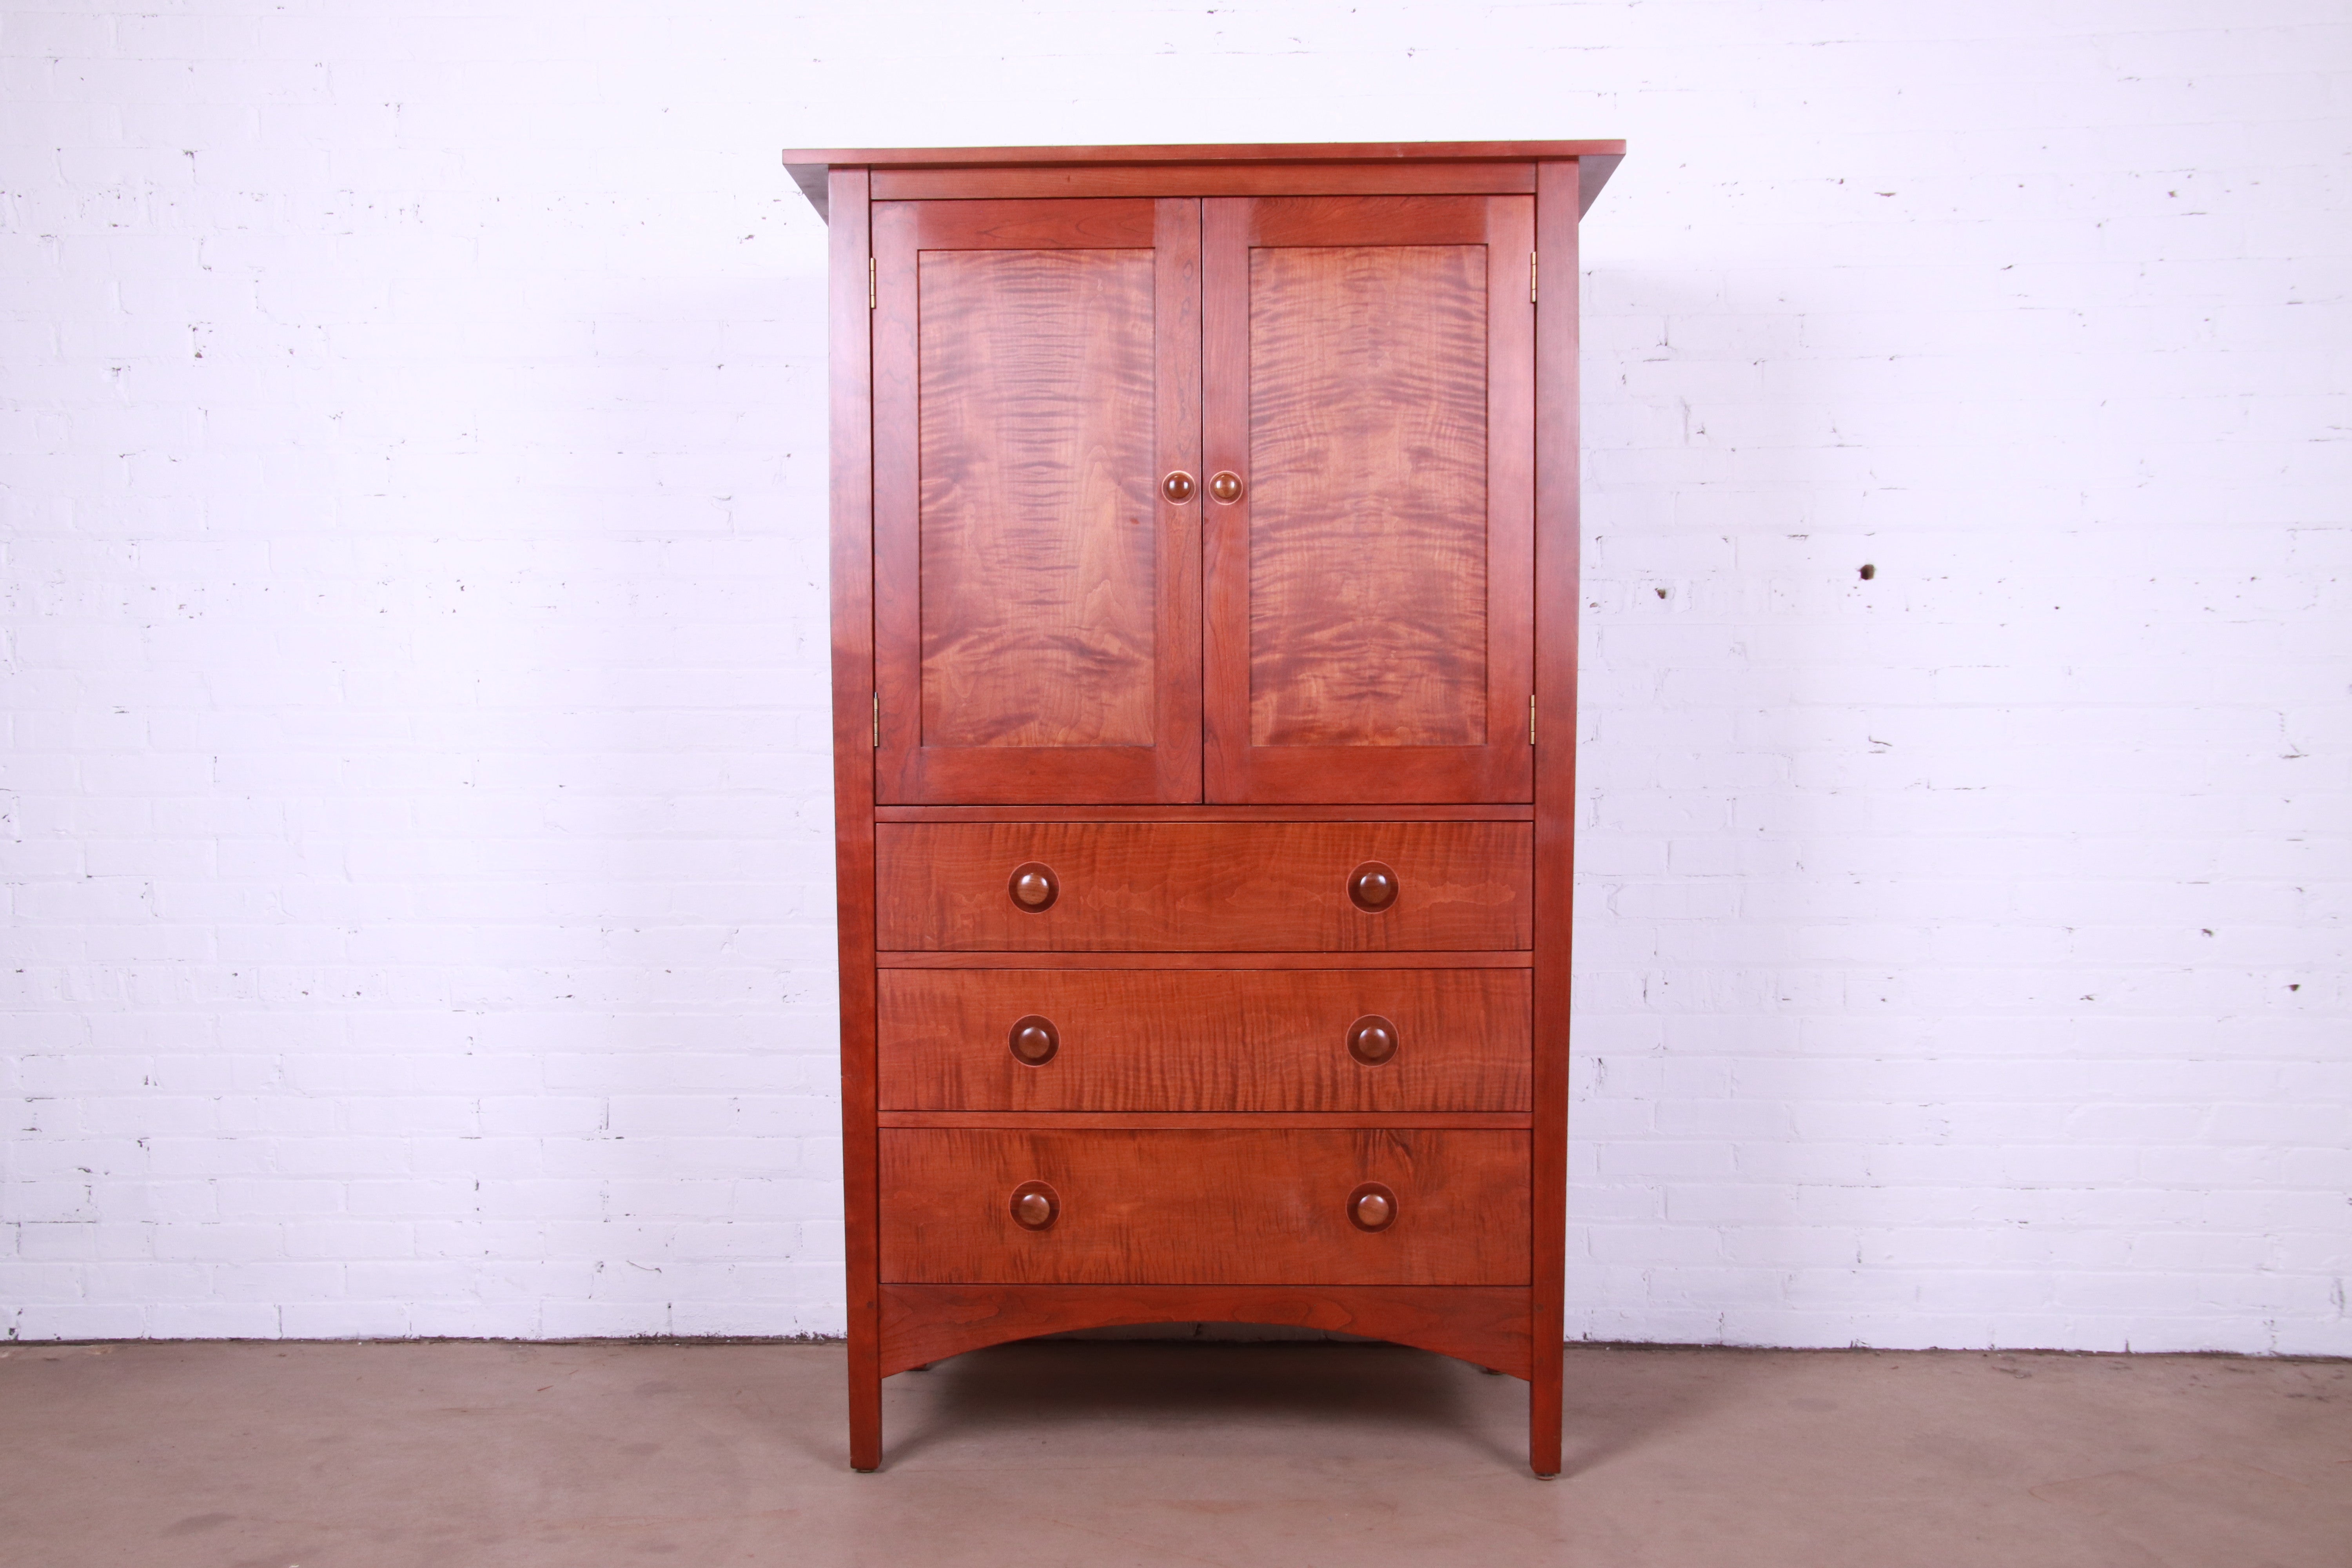 A gorgeous Arts & Crafts style armoire dresser or gentleman's chest

By Stickley, 